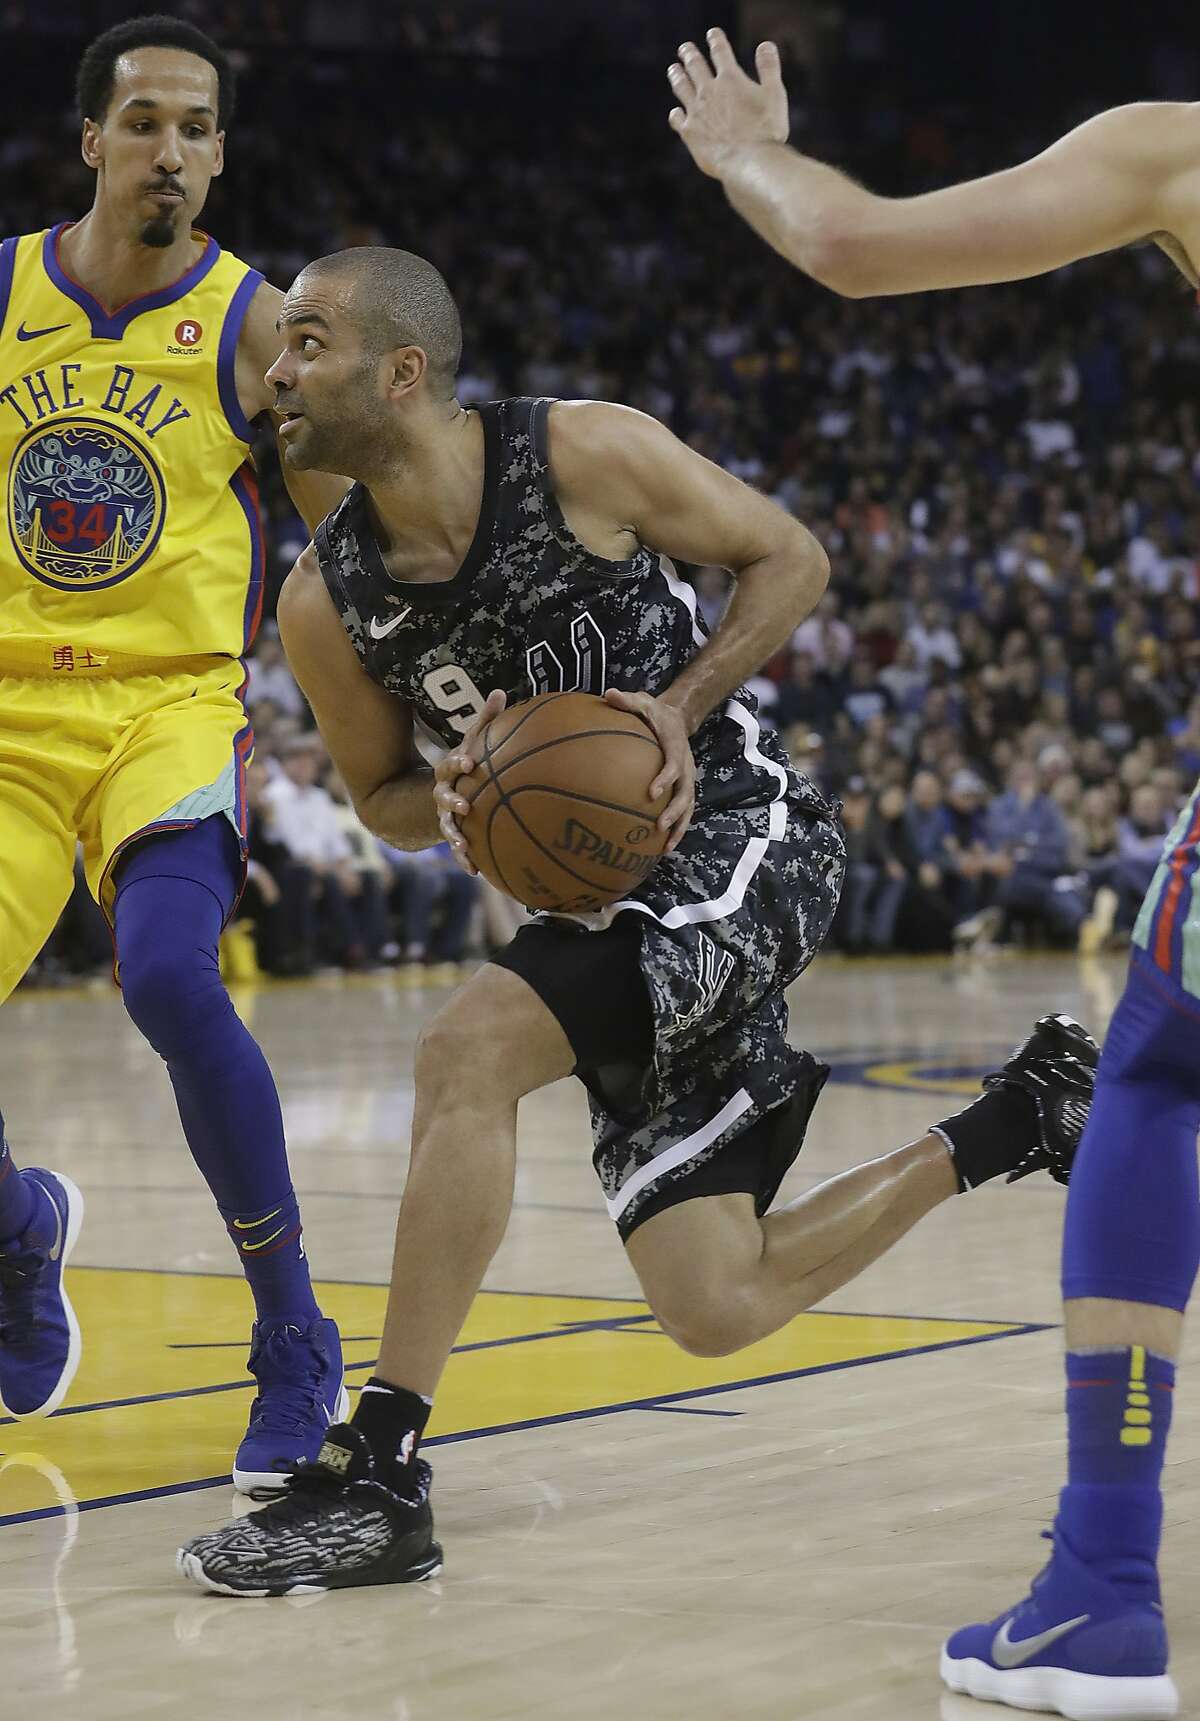 San Antonio Spurs guard Tony Parker (9) drives against the Golden State Warriors during the second half of an NBA basketball game in Oakland, Calif., Thursday, March 8, 2018. (AP Photo/Jeff Chiu)